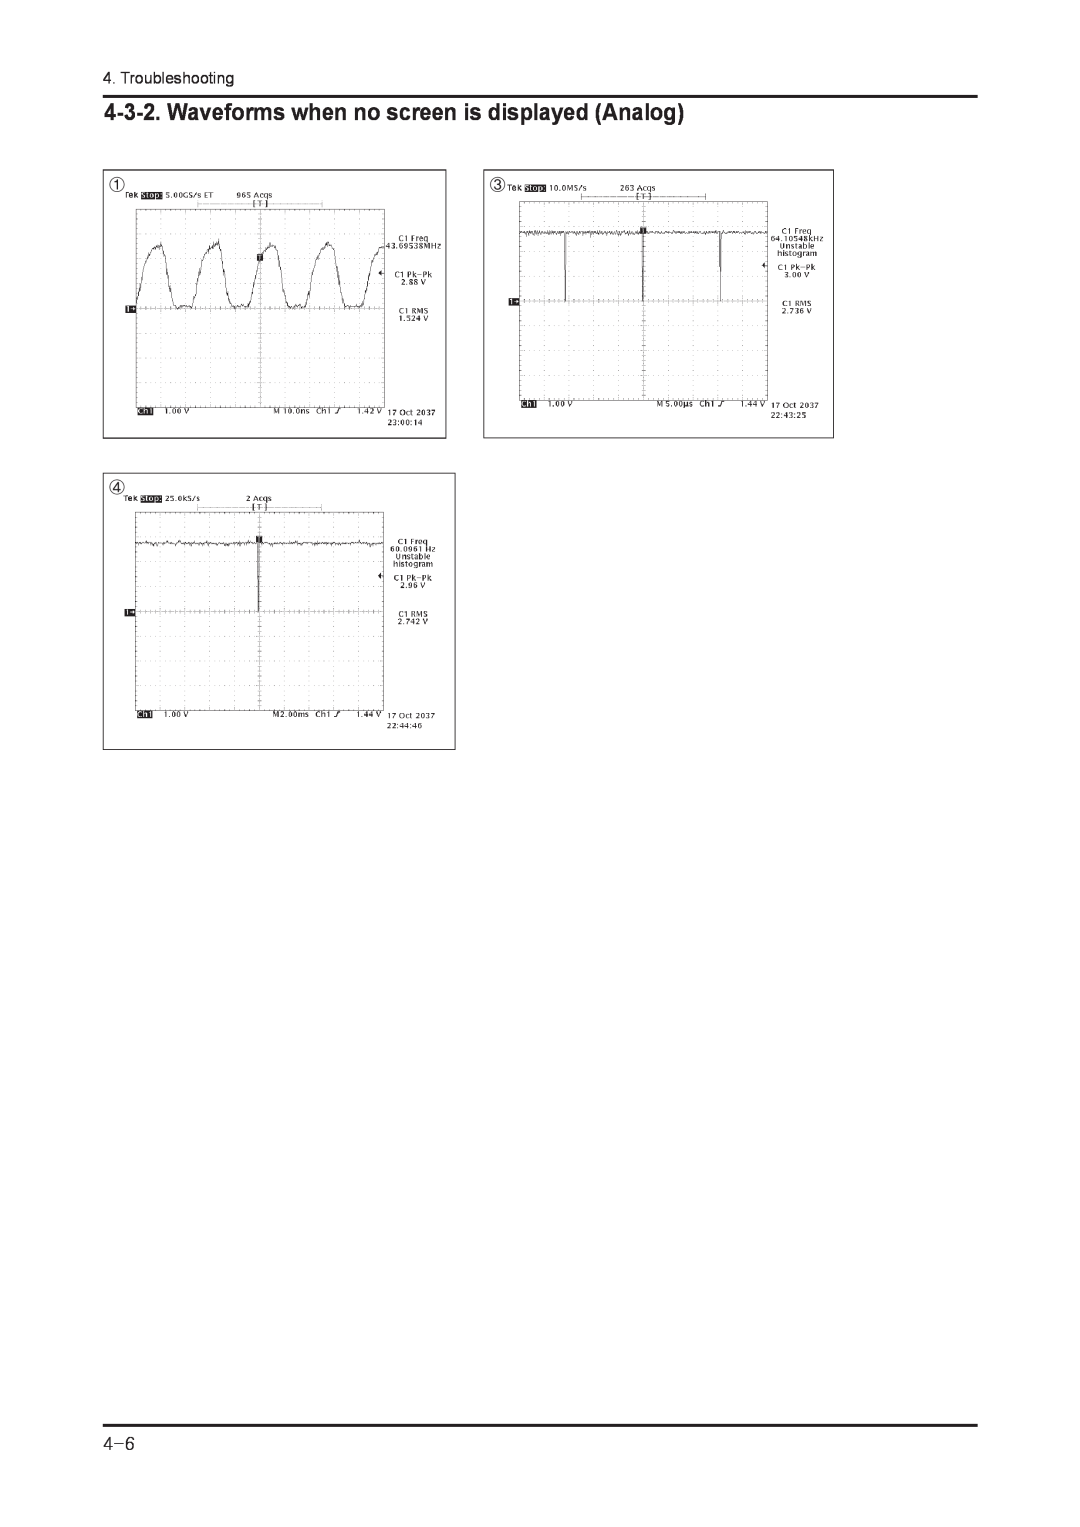 Samsung 943NWX service manual Waveforms when no screen is displayed Analog, Troubleshooting 